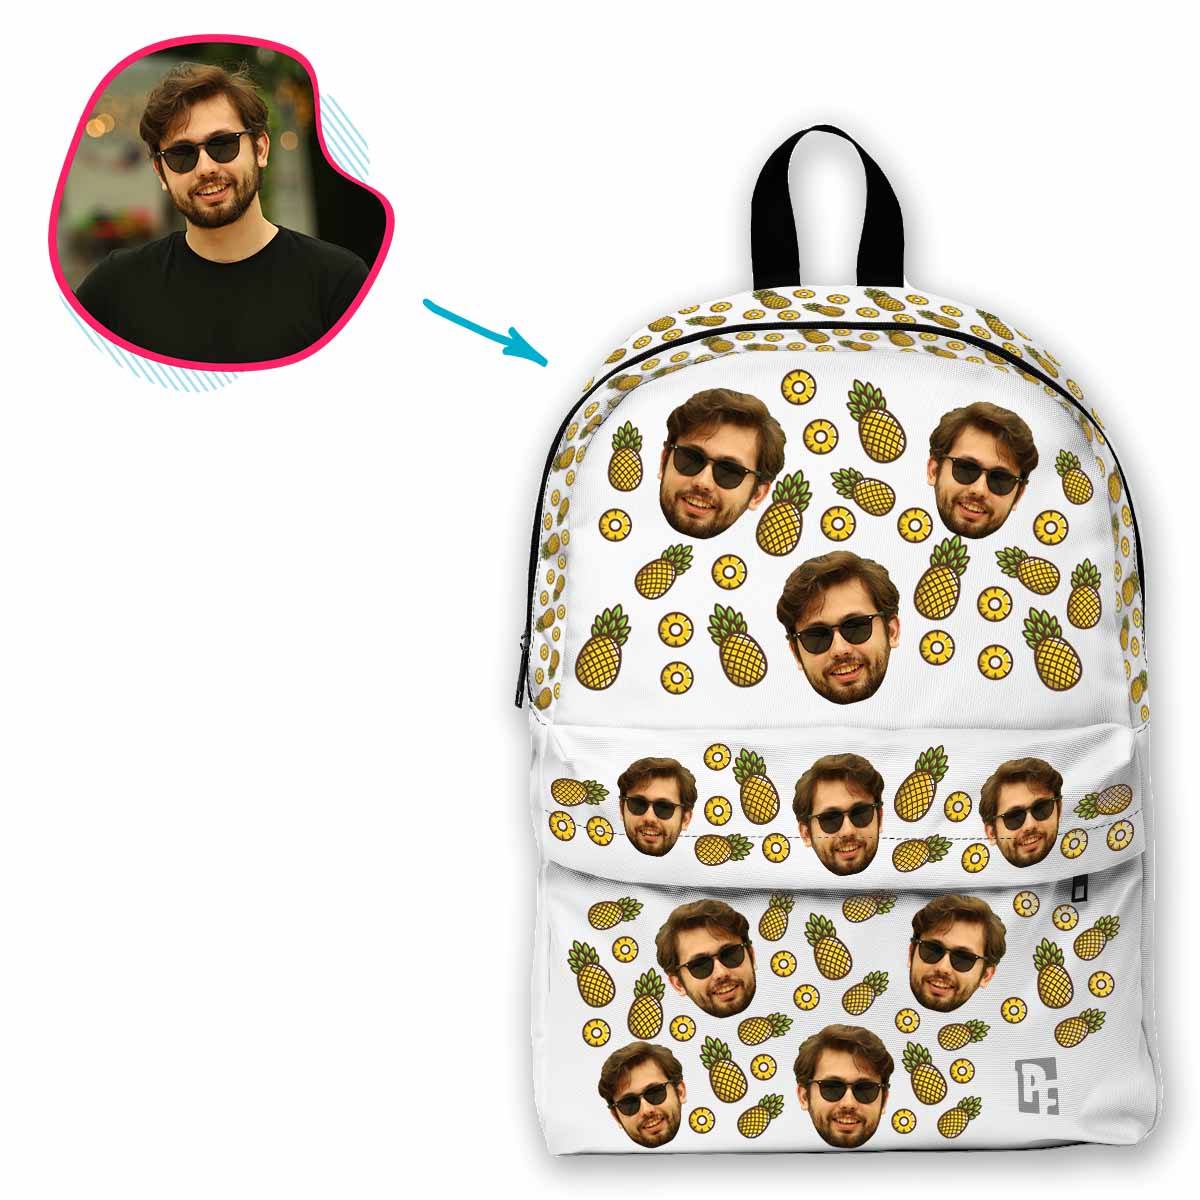 darkblue Fruits classic backpack personalized with photo of face printed on it